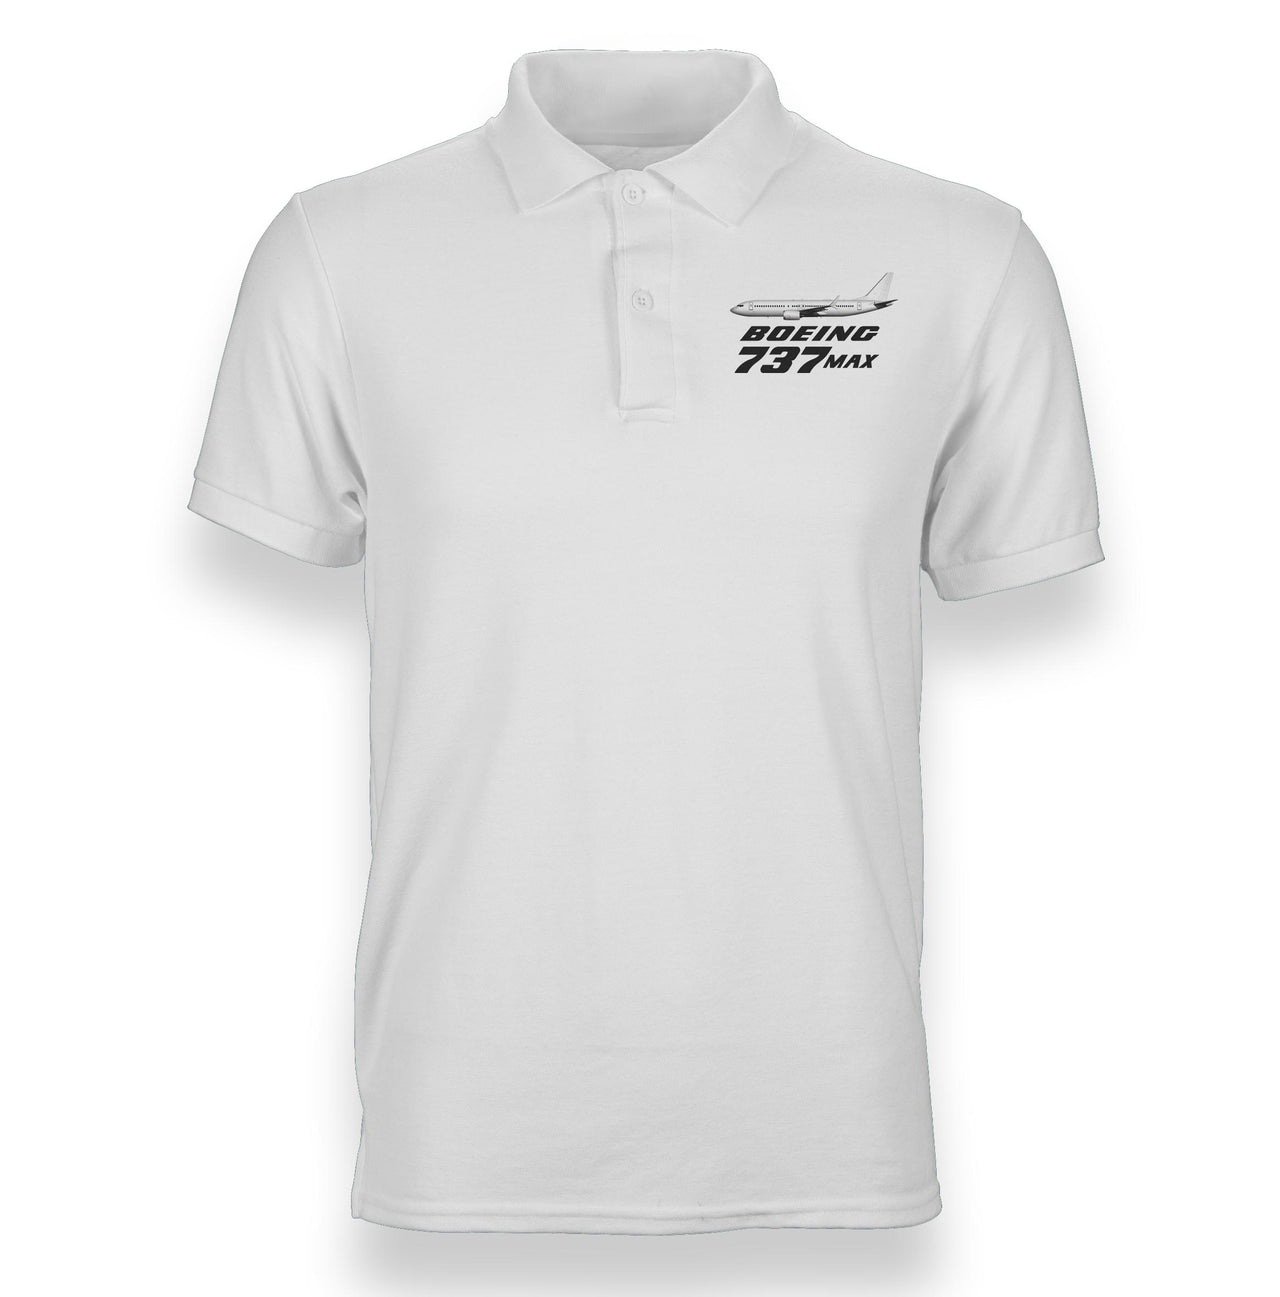 The Boeing 737Max Designed Polo T-Shirts